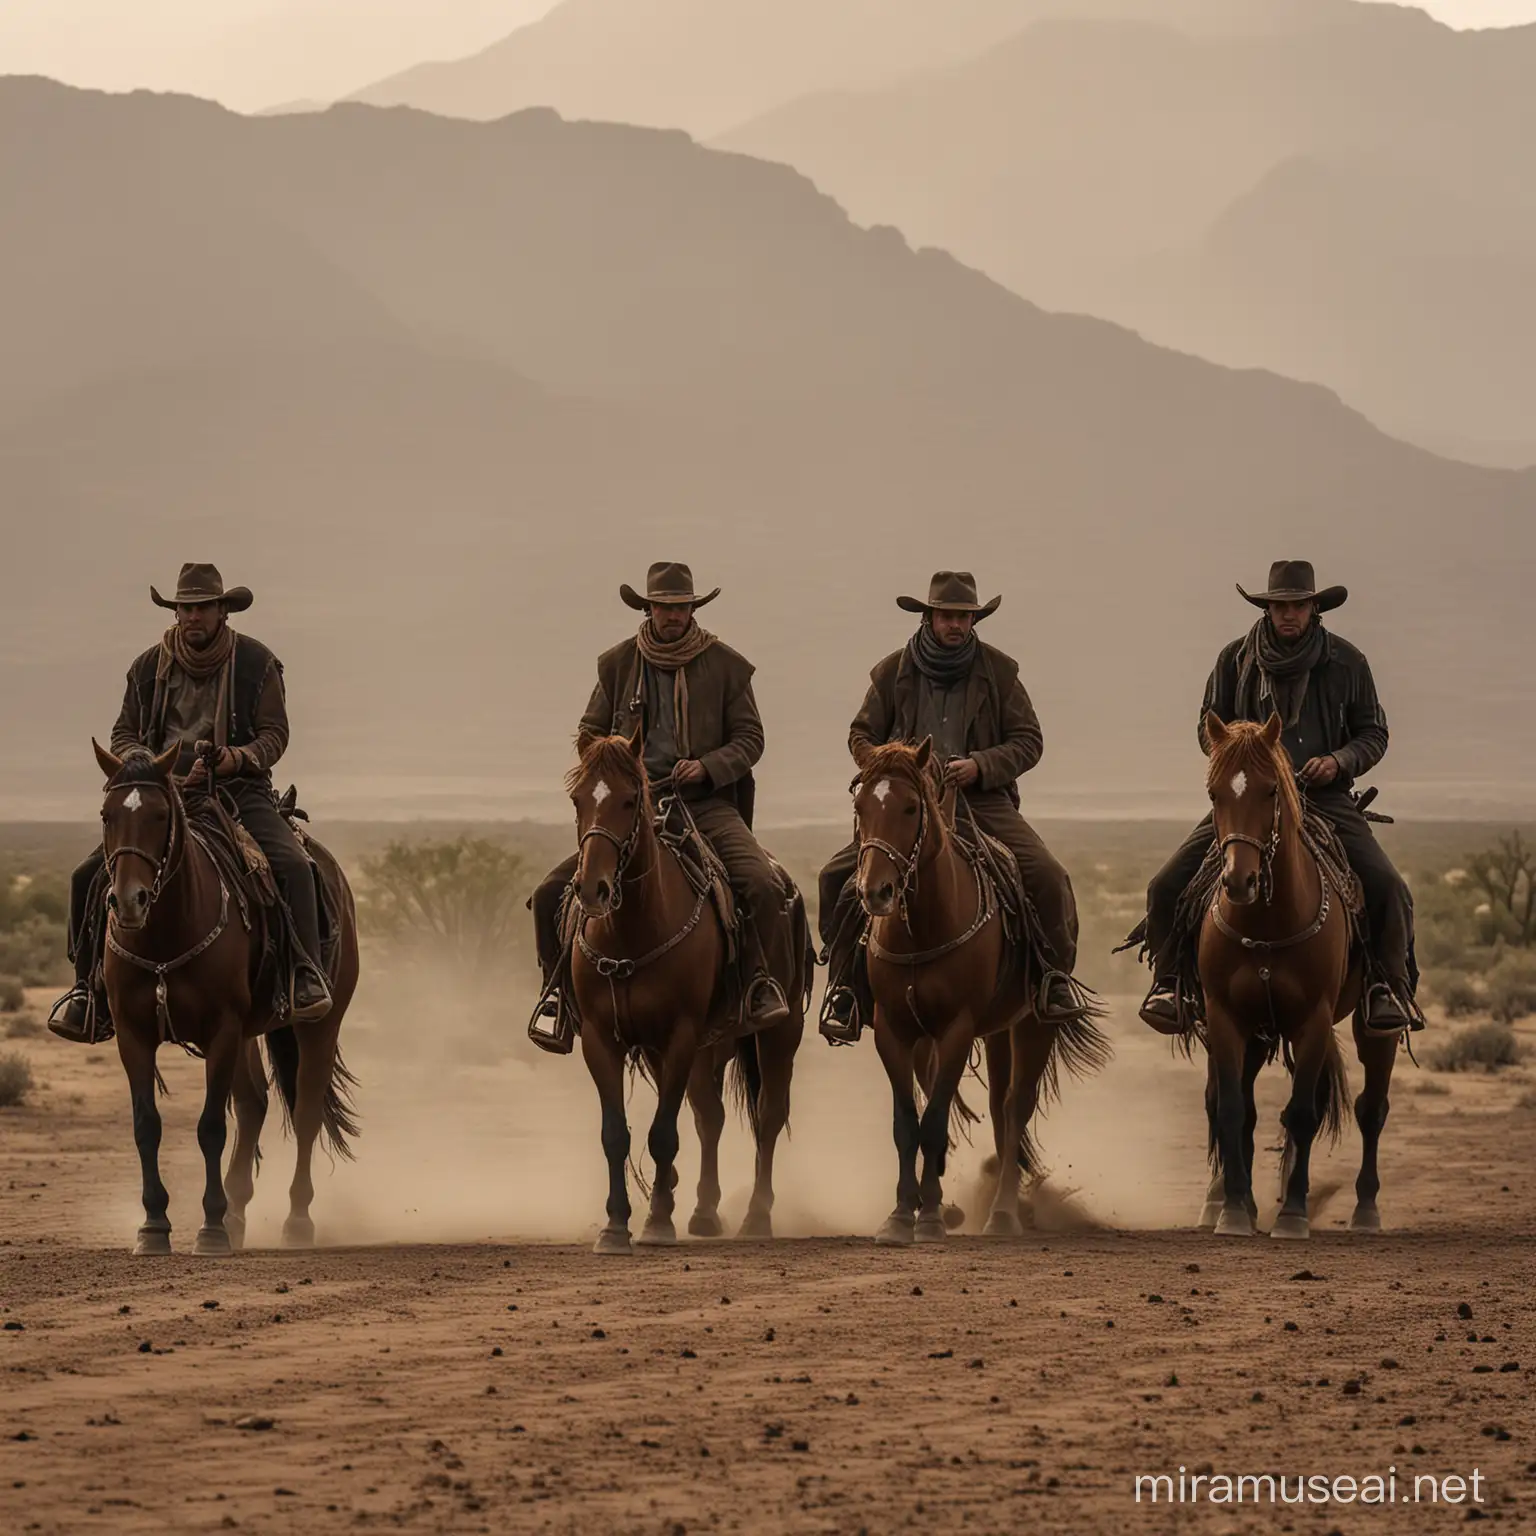 Five cowboys on horses lined up side by side in the desert, the men appear tough and rugged, the scene is dark